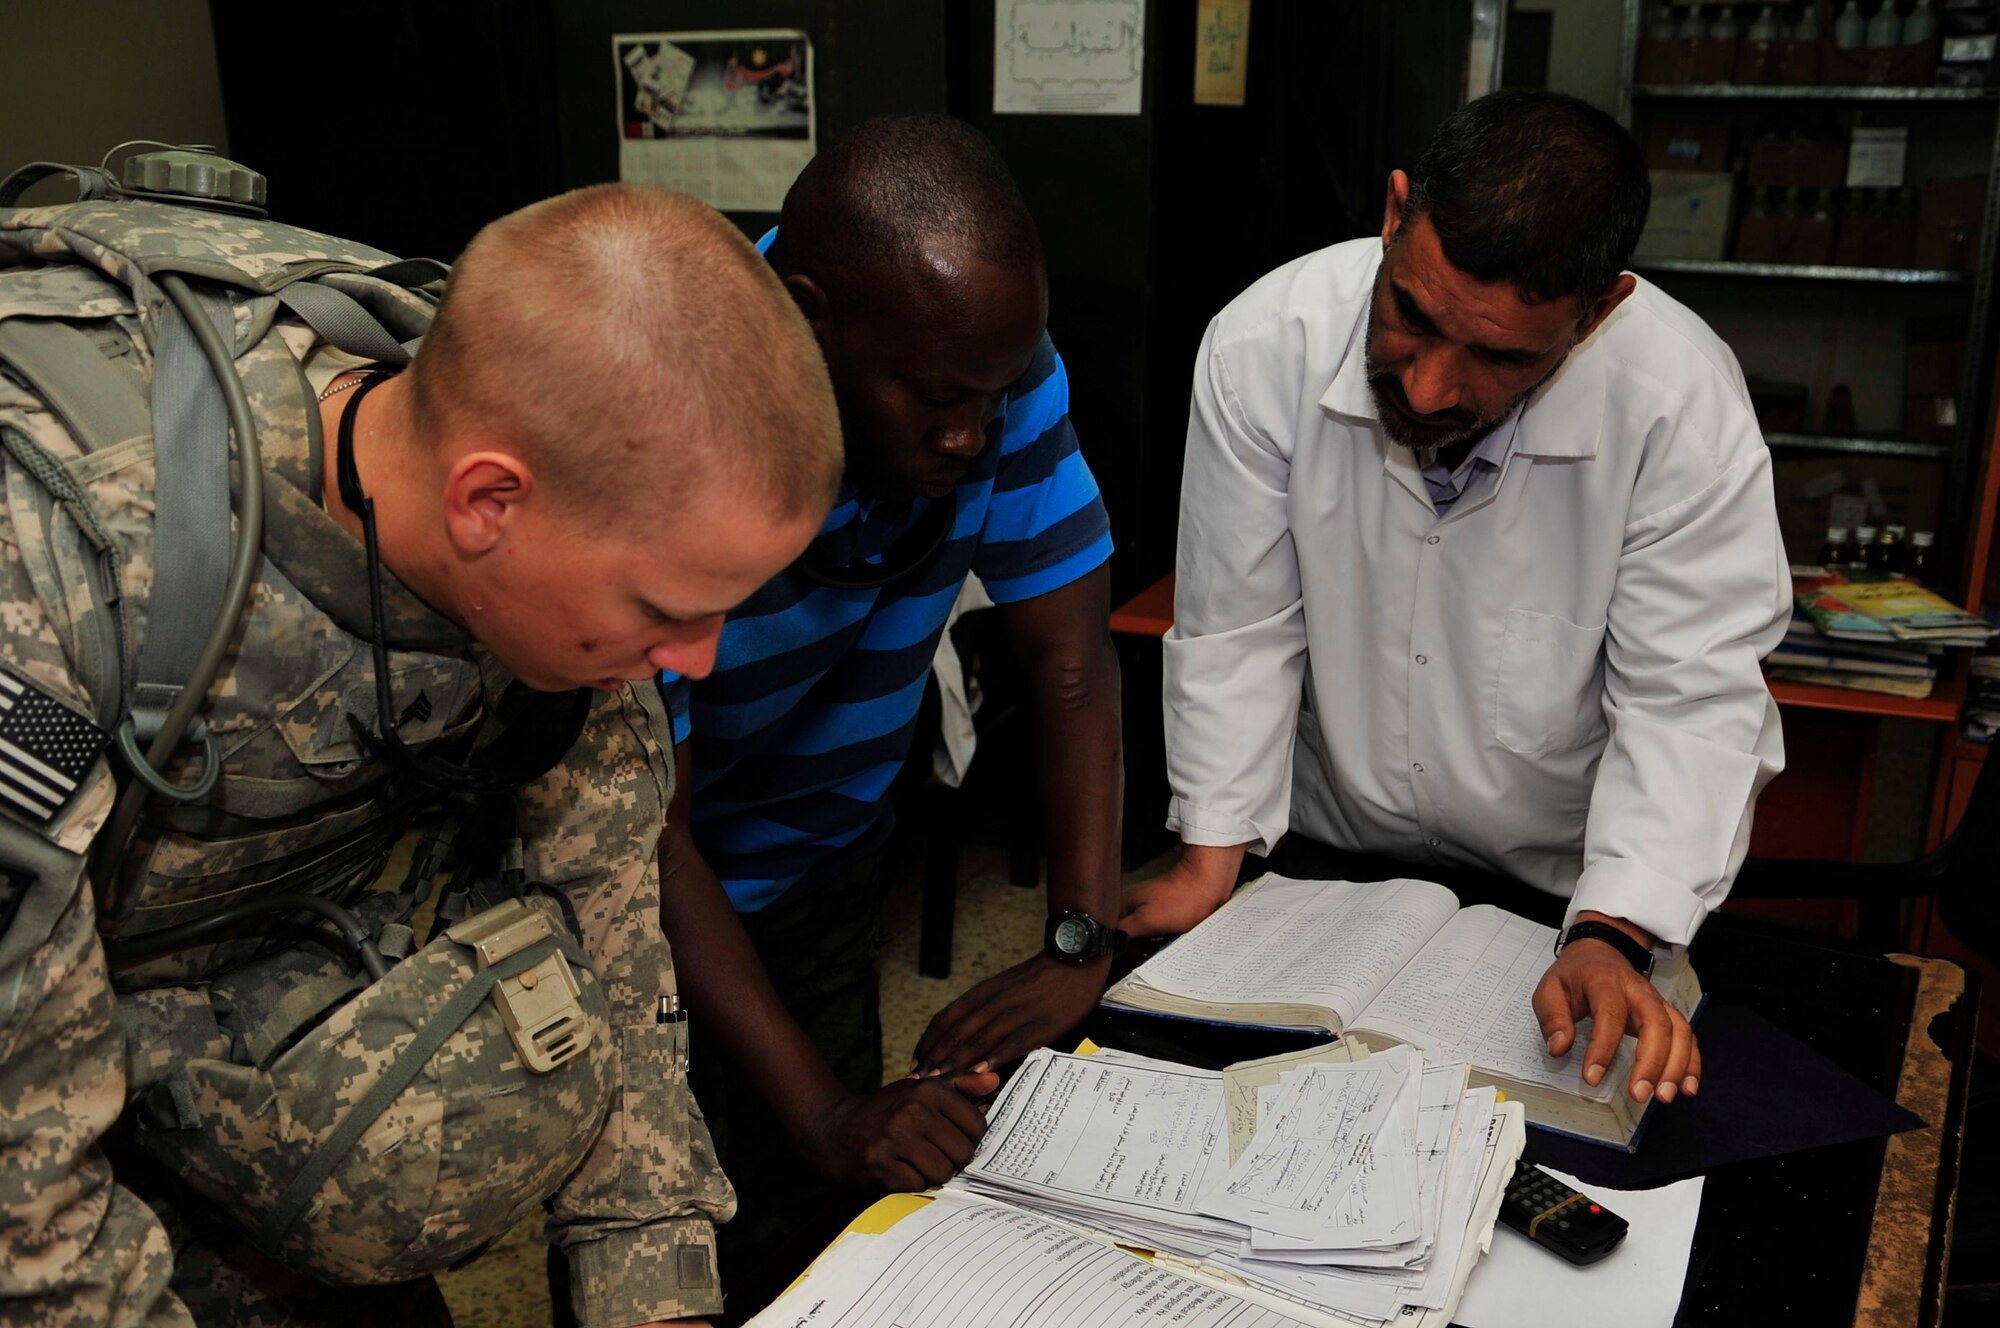 U.S. Army Sgt. Jesse Jeannette, U.S. Forces – Iraq provost marshal office corrections assistance transition team medical assessor, reviews an inmate’s medical record with an interpreter and an Iraqi doctor in a prison in Baghdad’s Rusafa Prison Complex, April 6, 2011. Sergeant Jeannette is conducting an assessment of medical conditions at the facility. (U.S. Air Force photo by Senior Master Sgt. Larry A. Schneck)